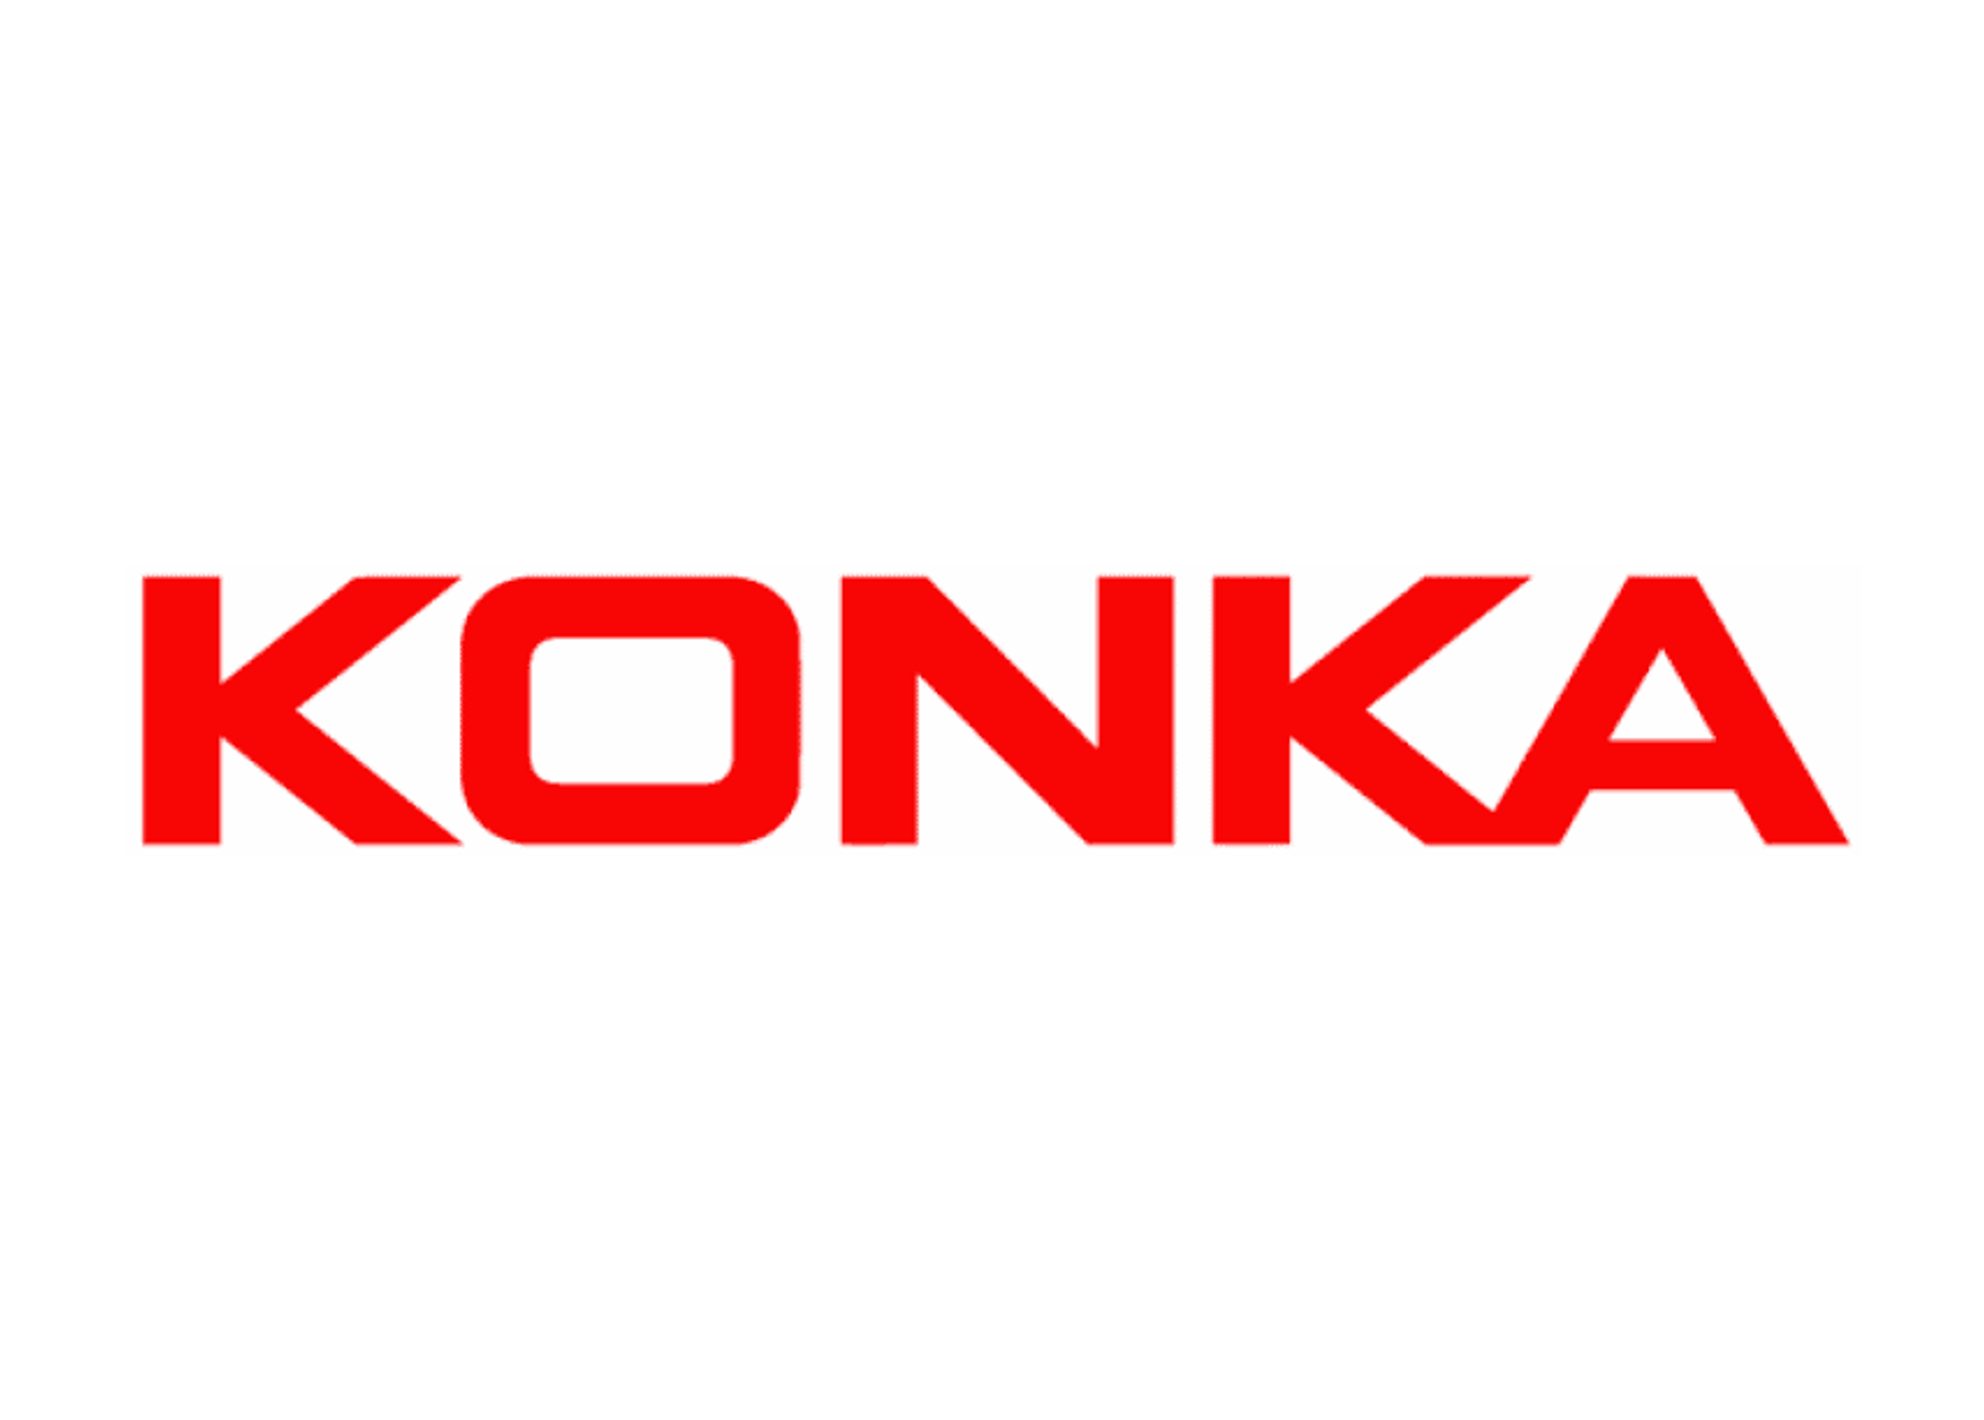 Konka Secures Worldwide Licenses to Via’s Wireless and Audio Patent Pools